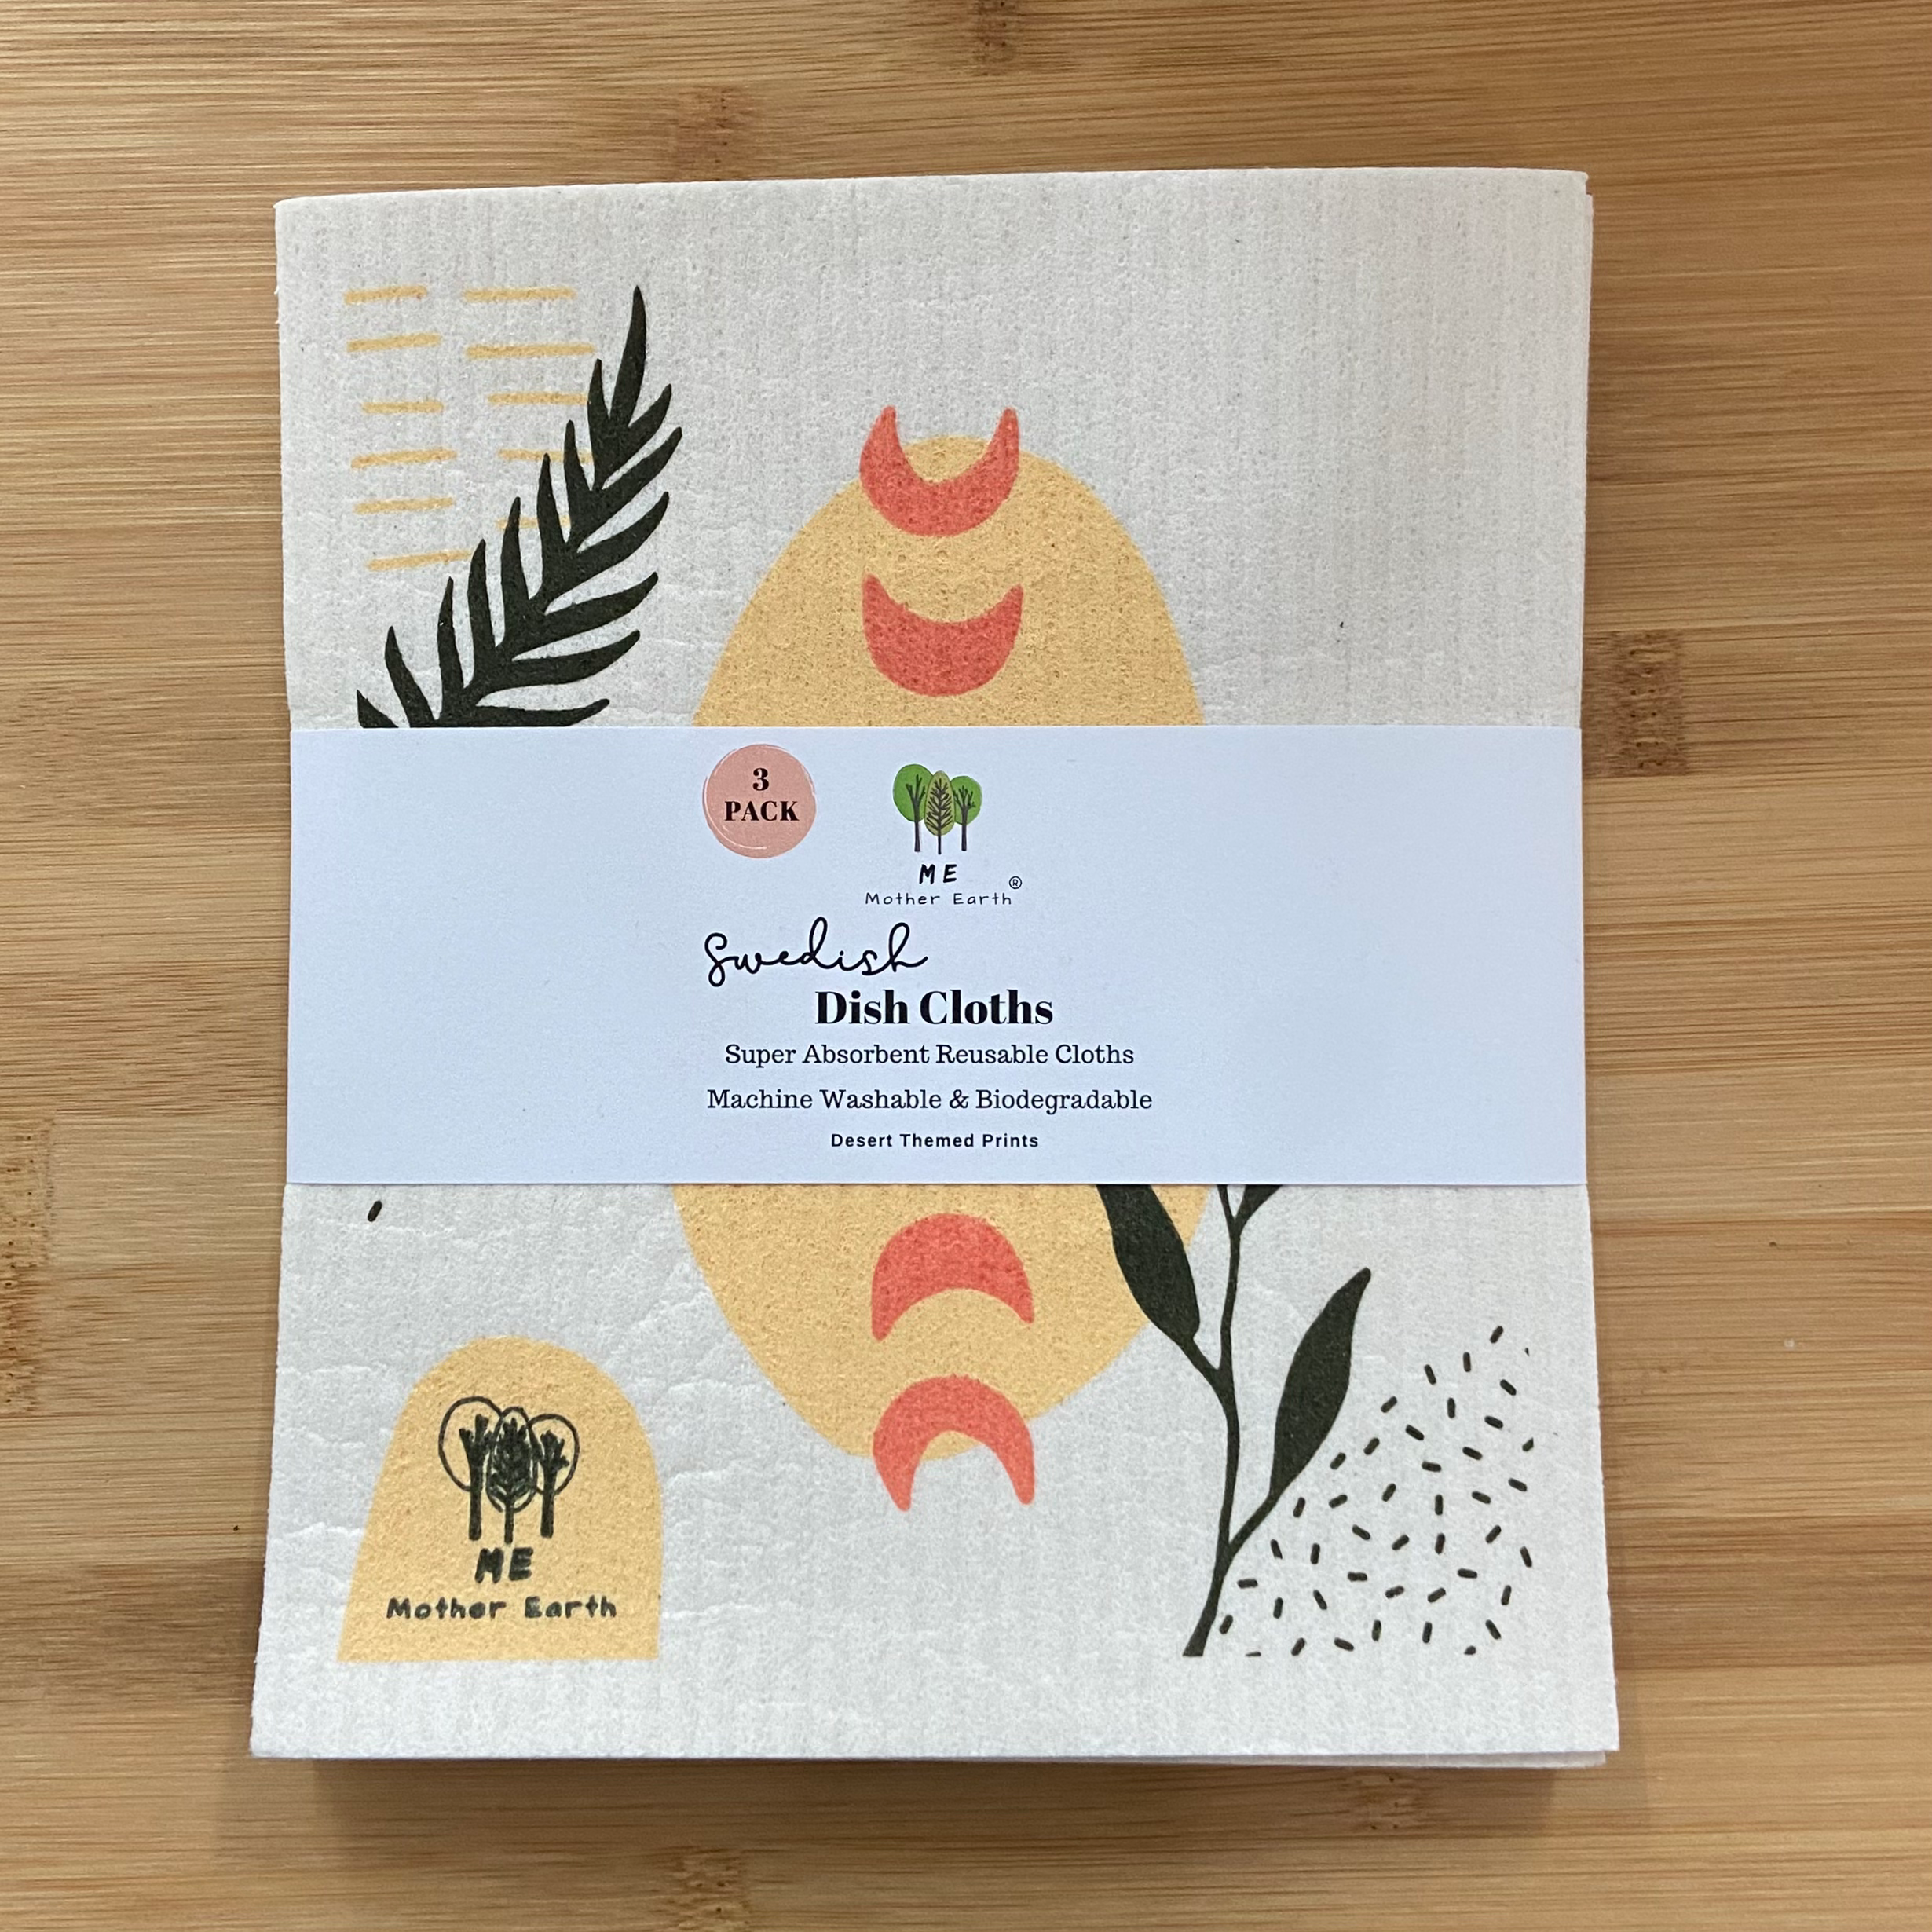 Me Mother Earth Natural Swedish Dish Cloth 3 Pack